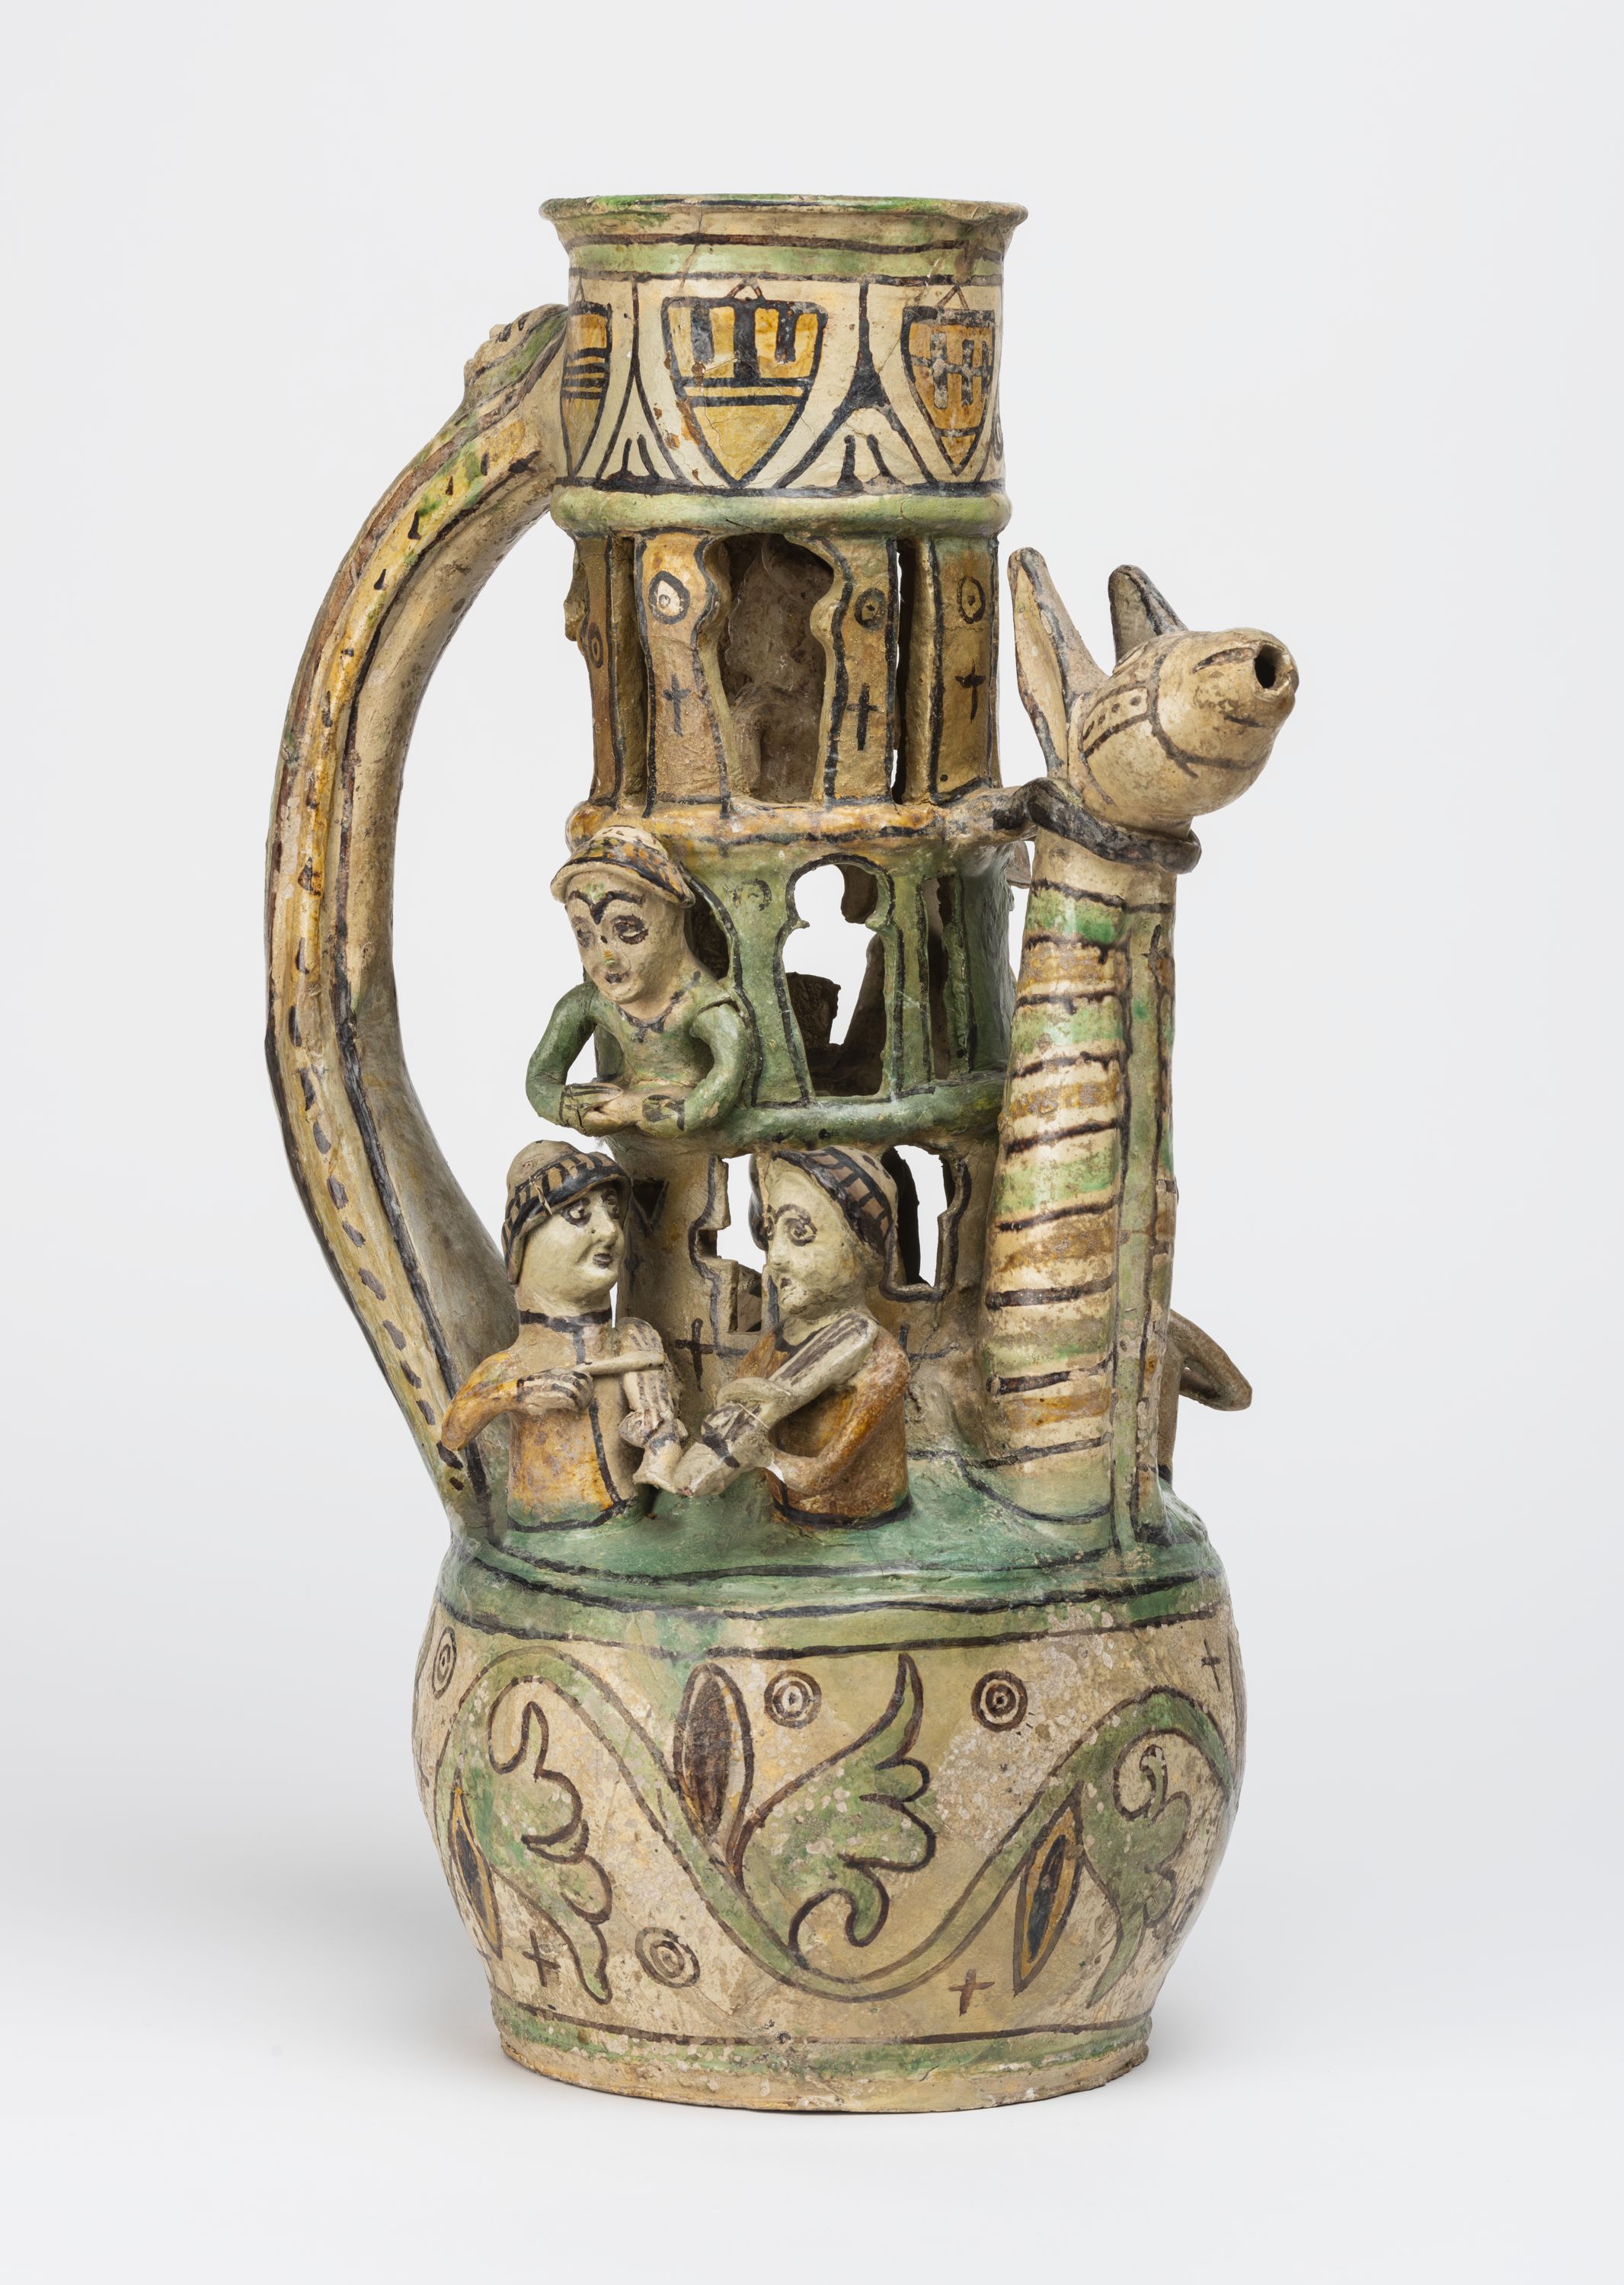 Exeter puzzle jug, Making History gallery